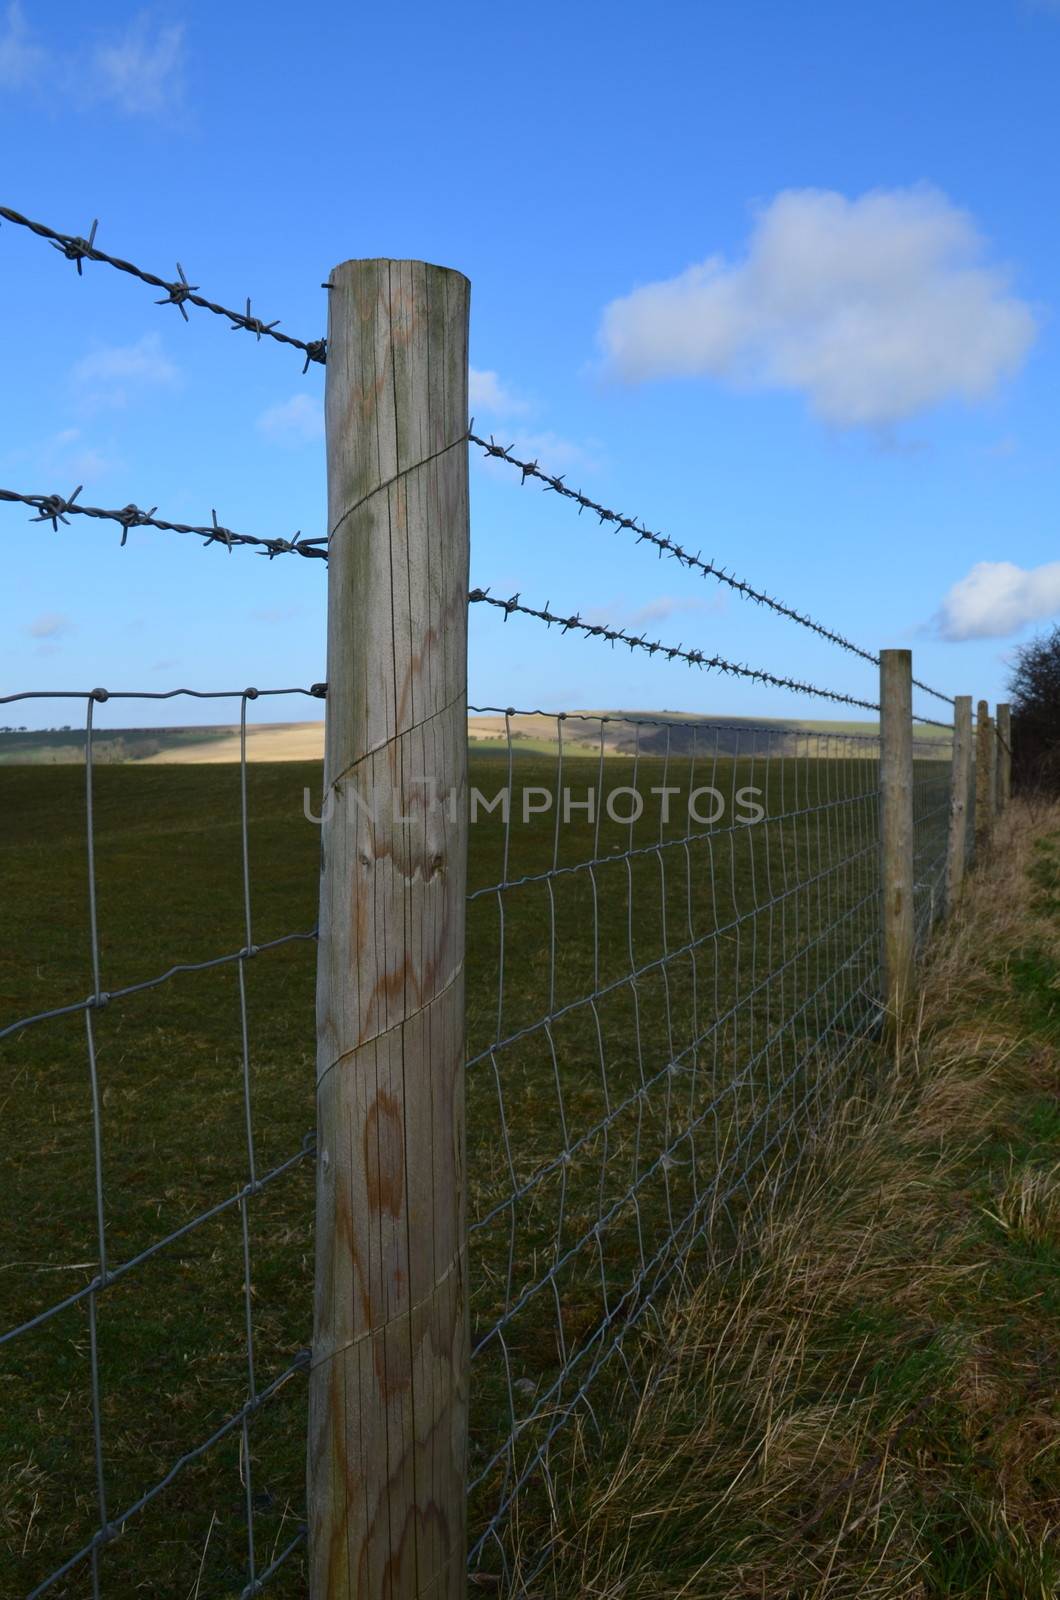 Barbed wire fence running through open pasture land in Sussex,England.